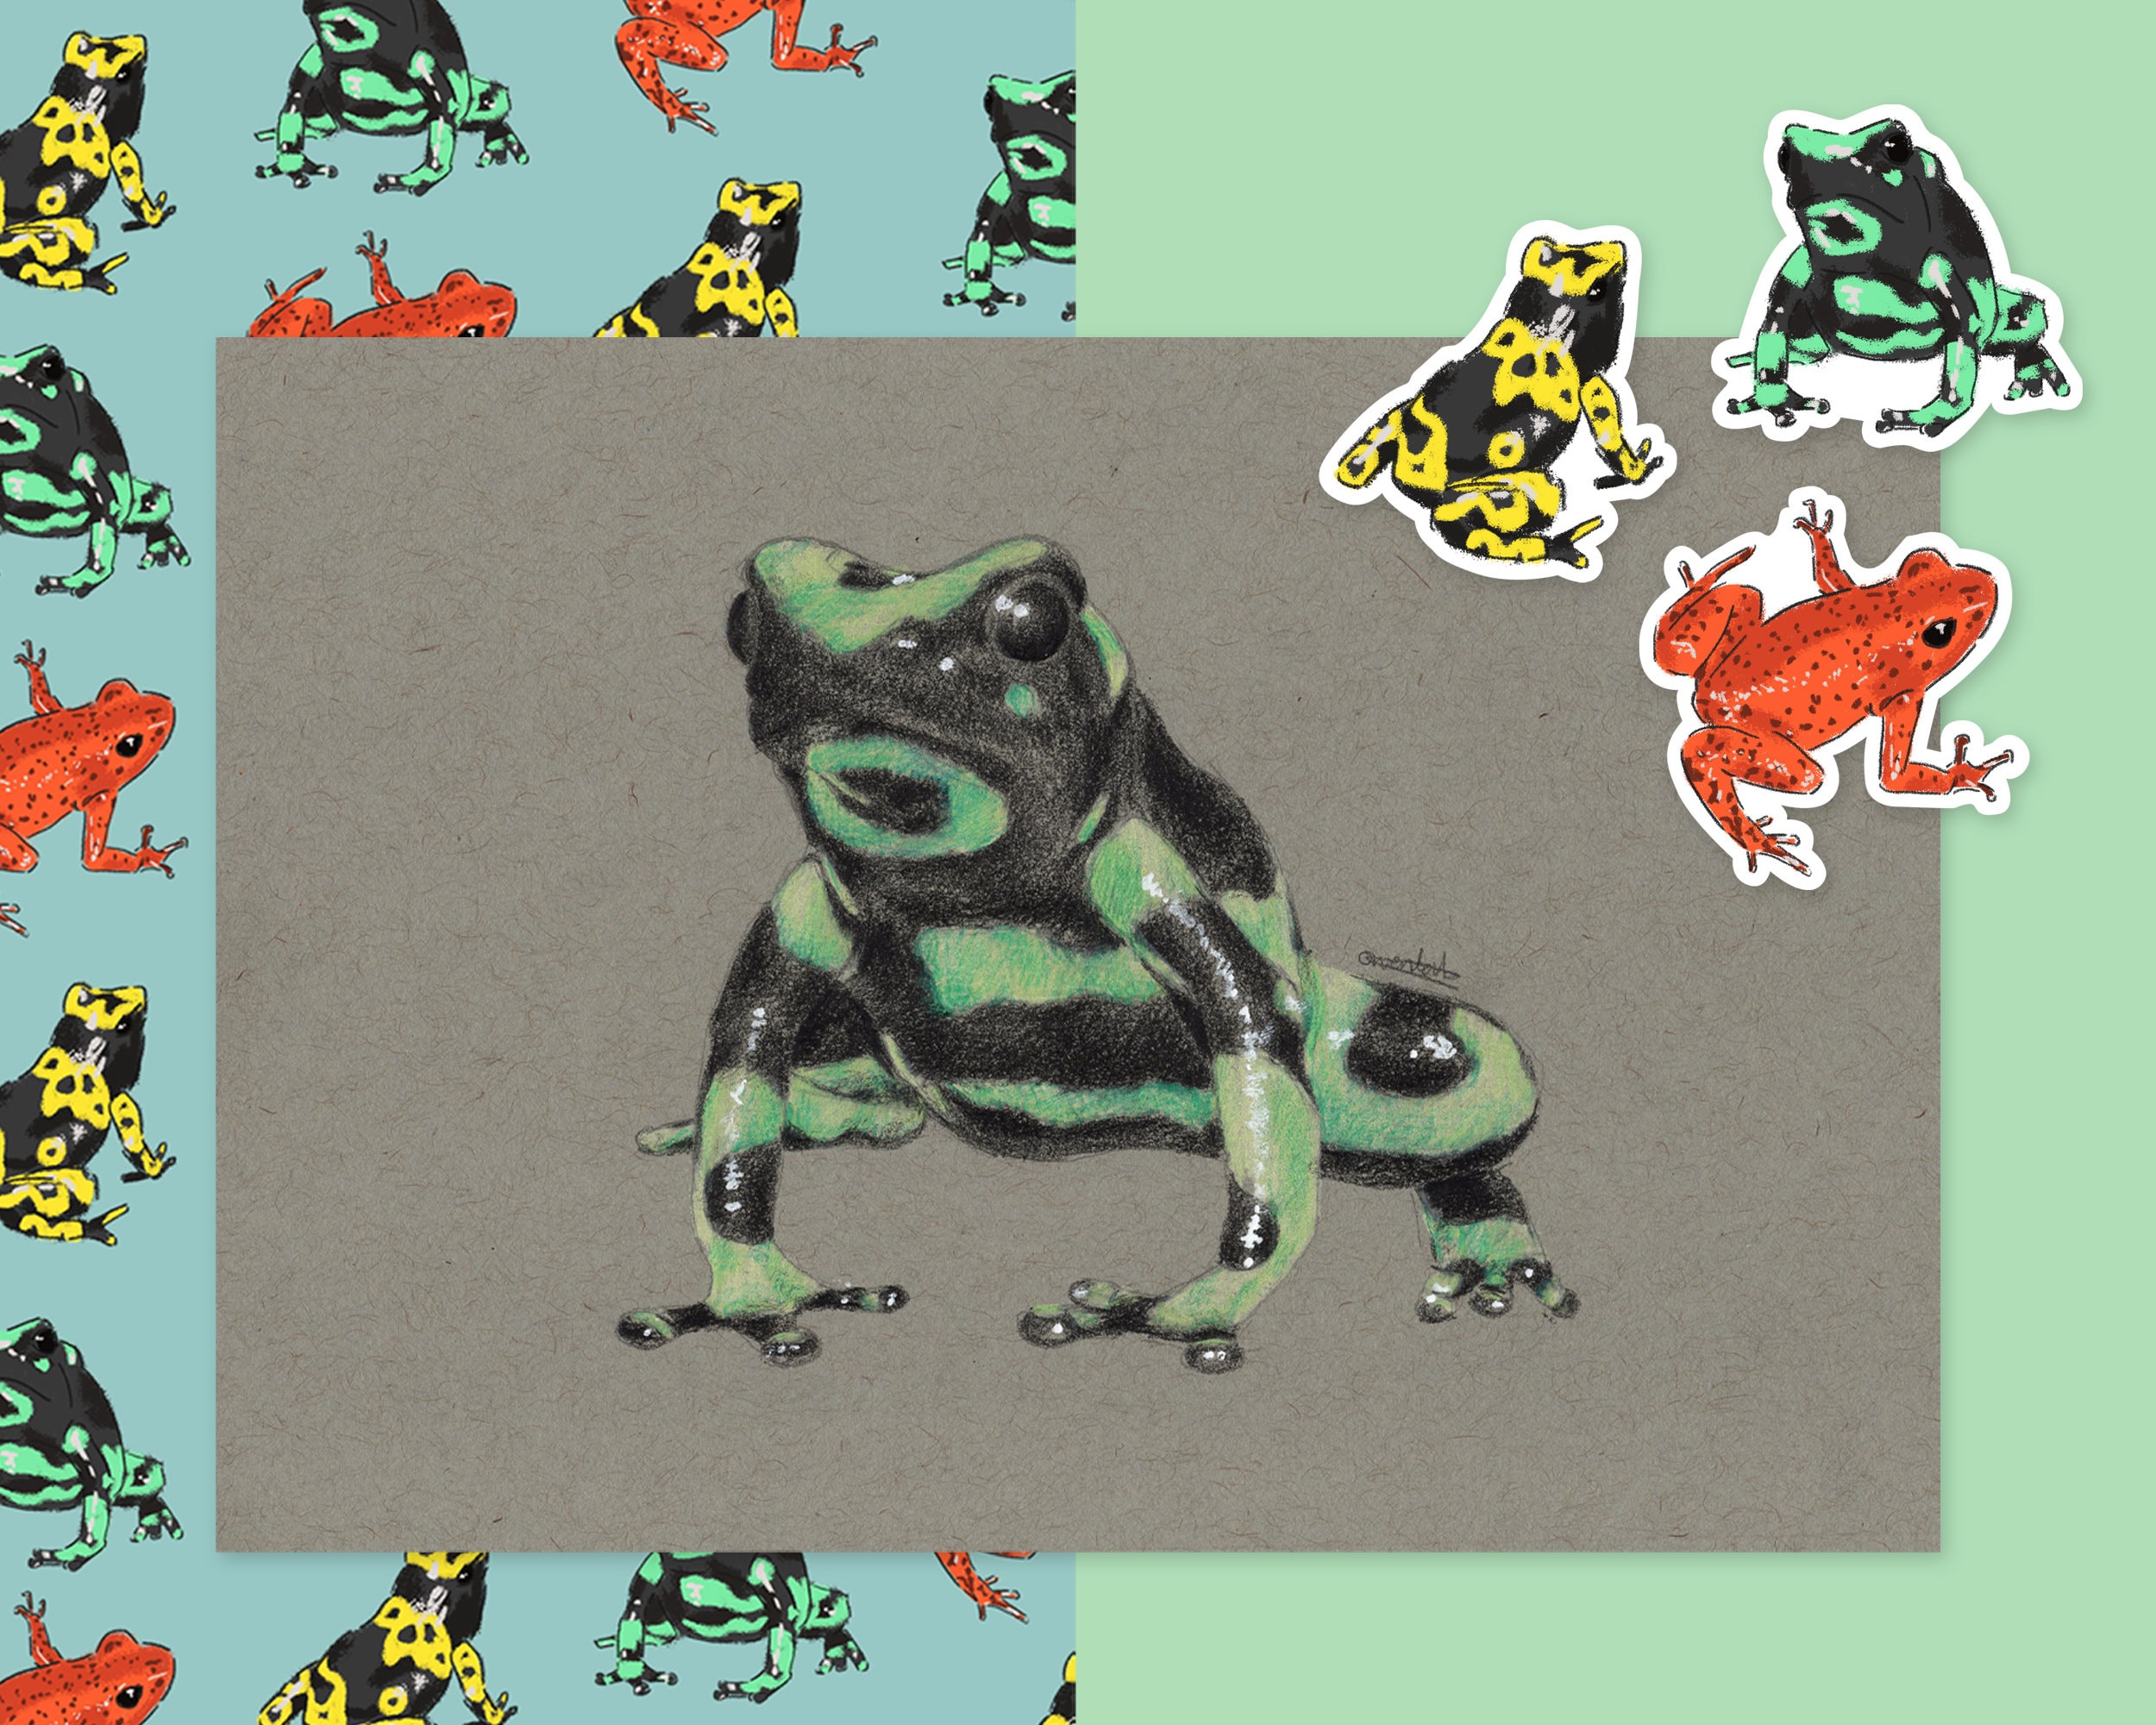 A drawing of an animal with many stickers - Frog